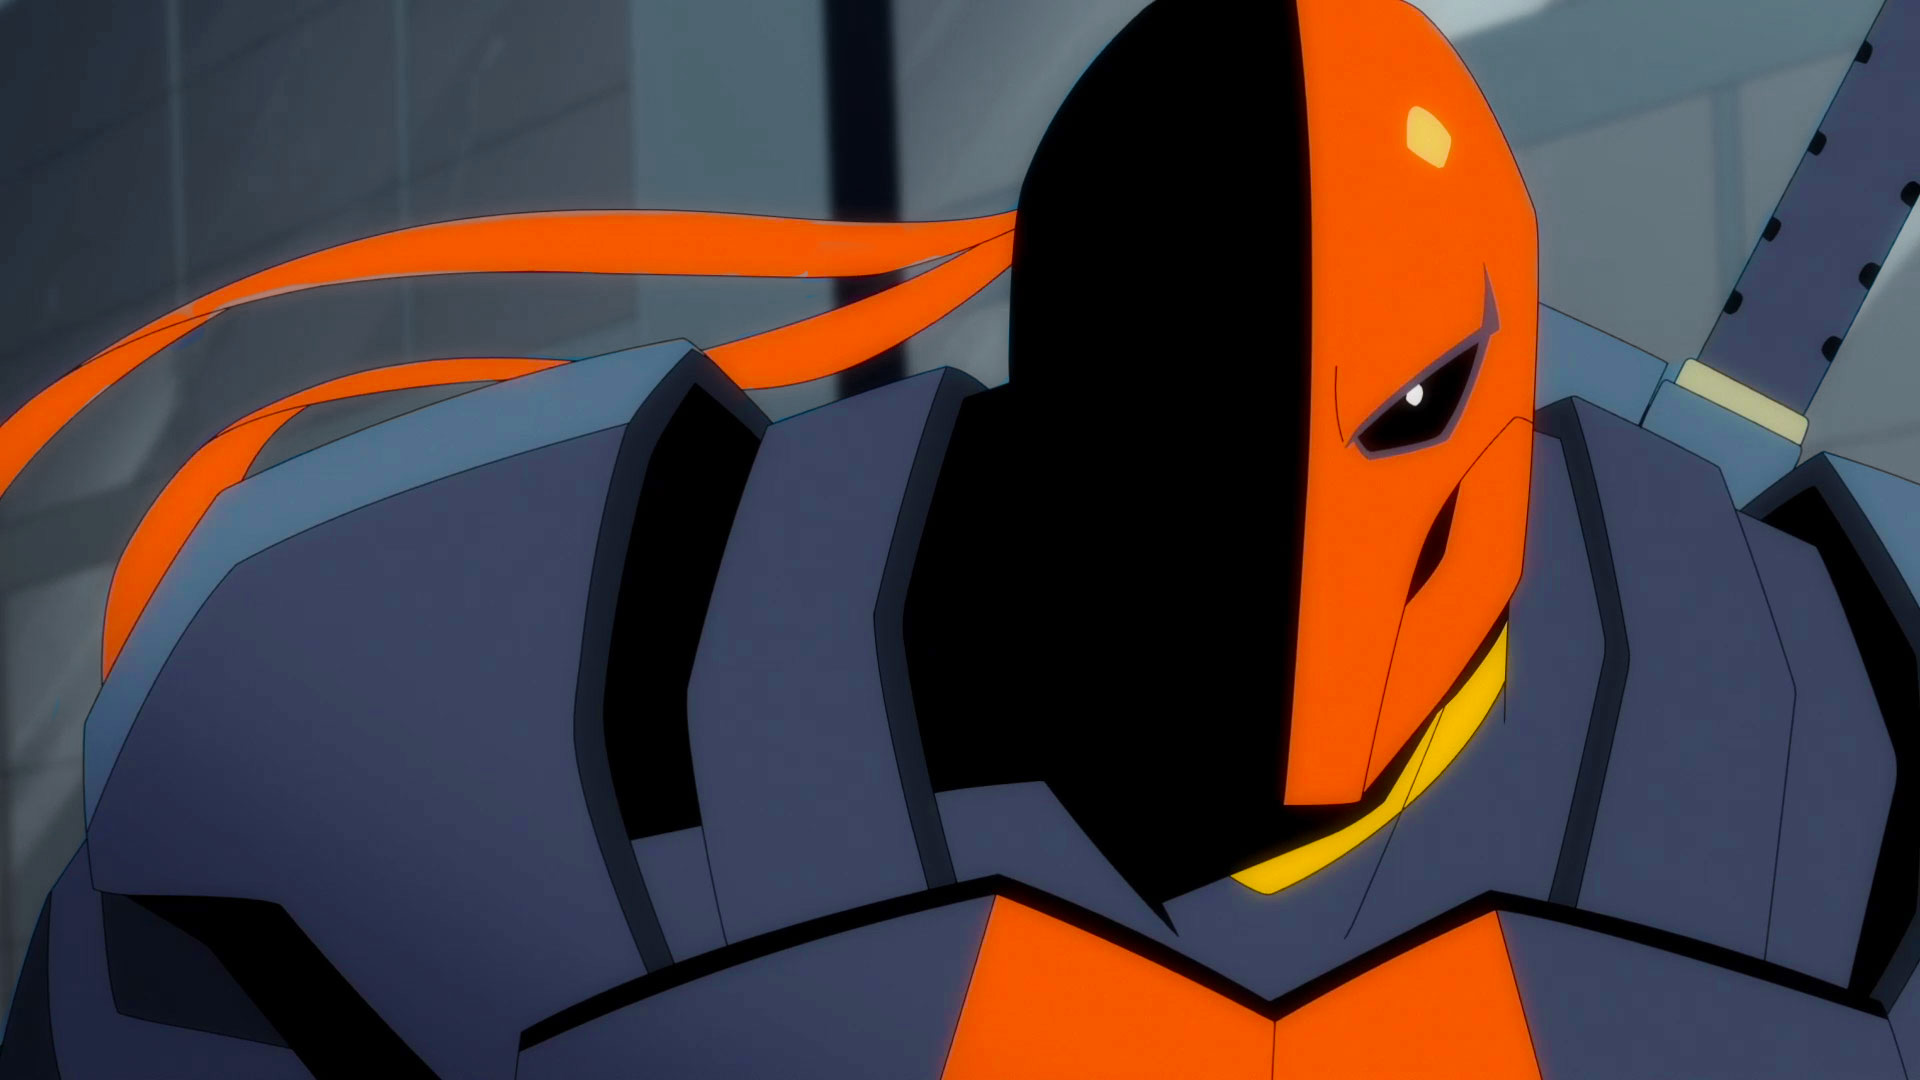 Deathstroke as a anime character